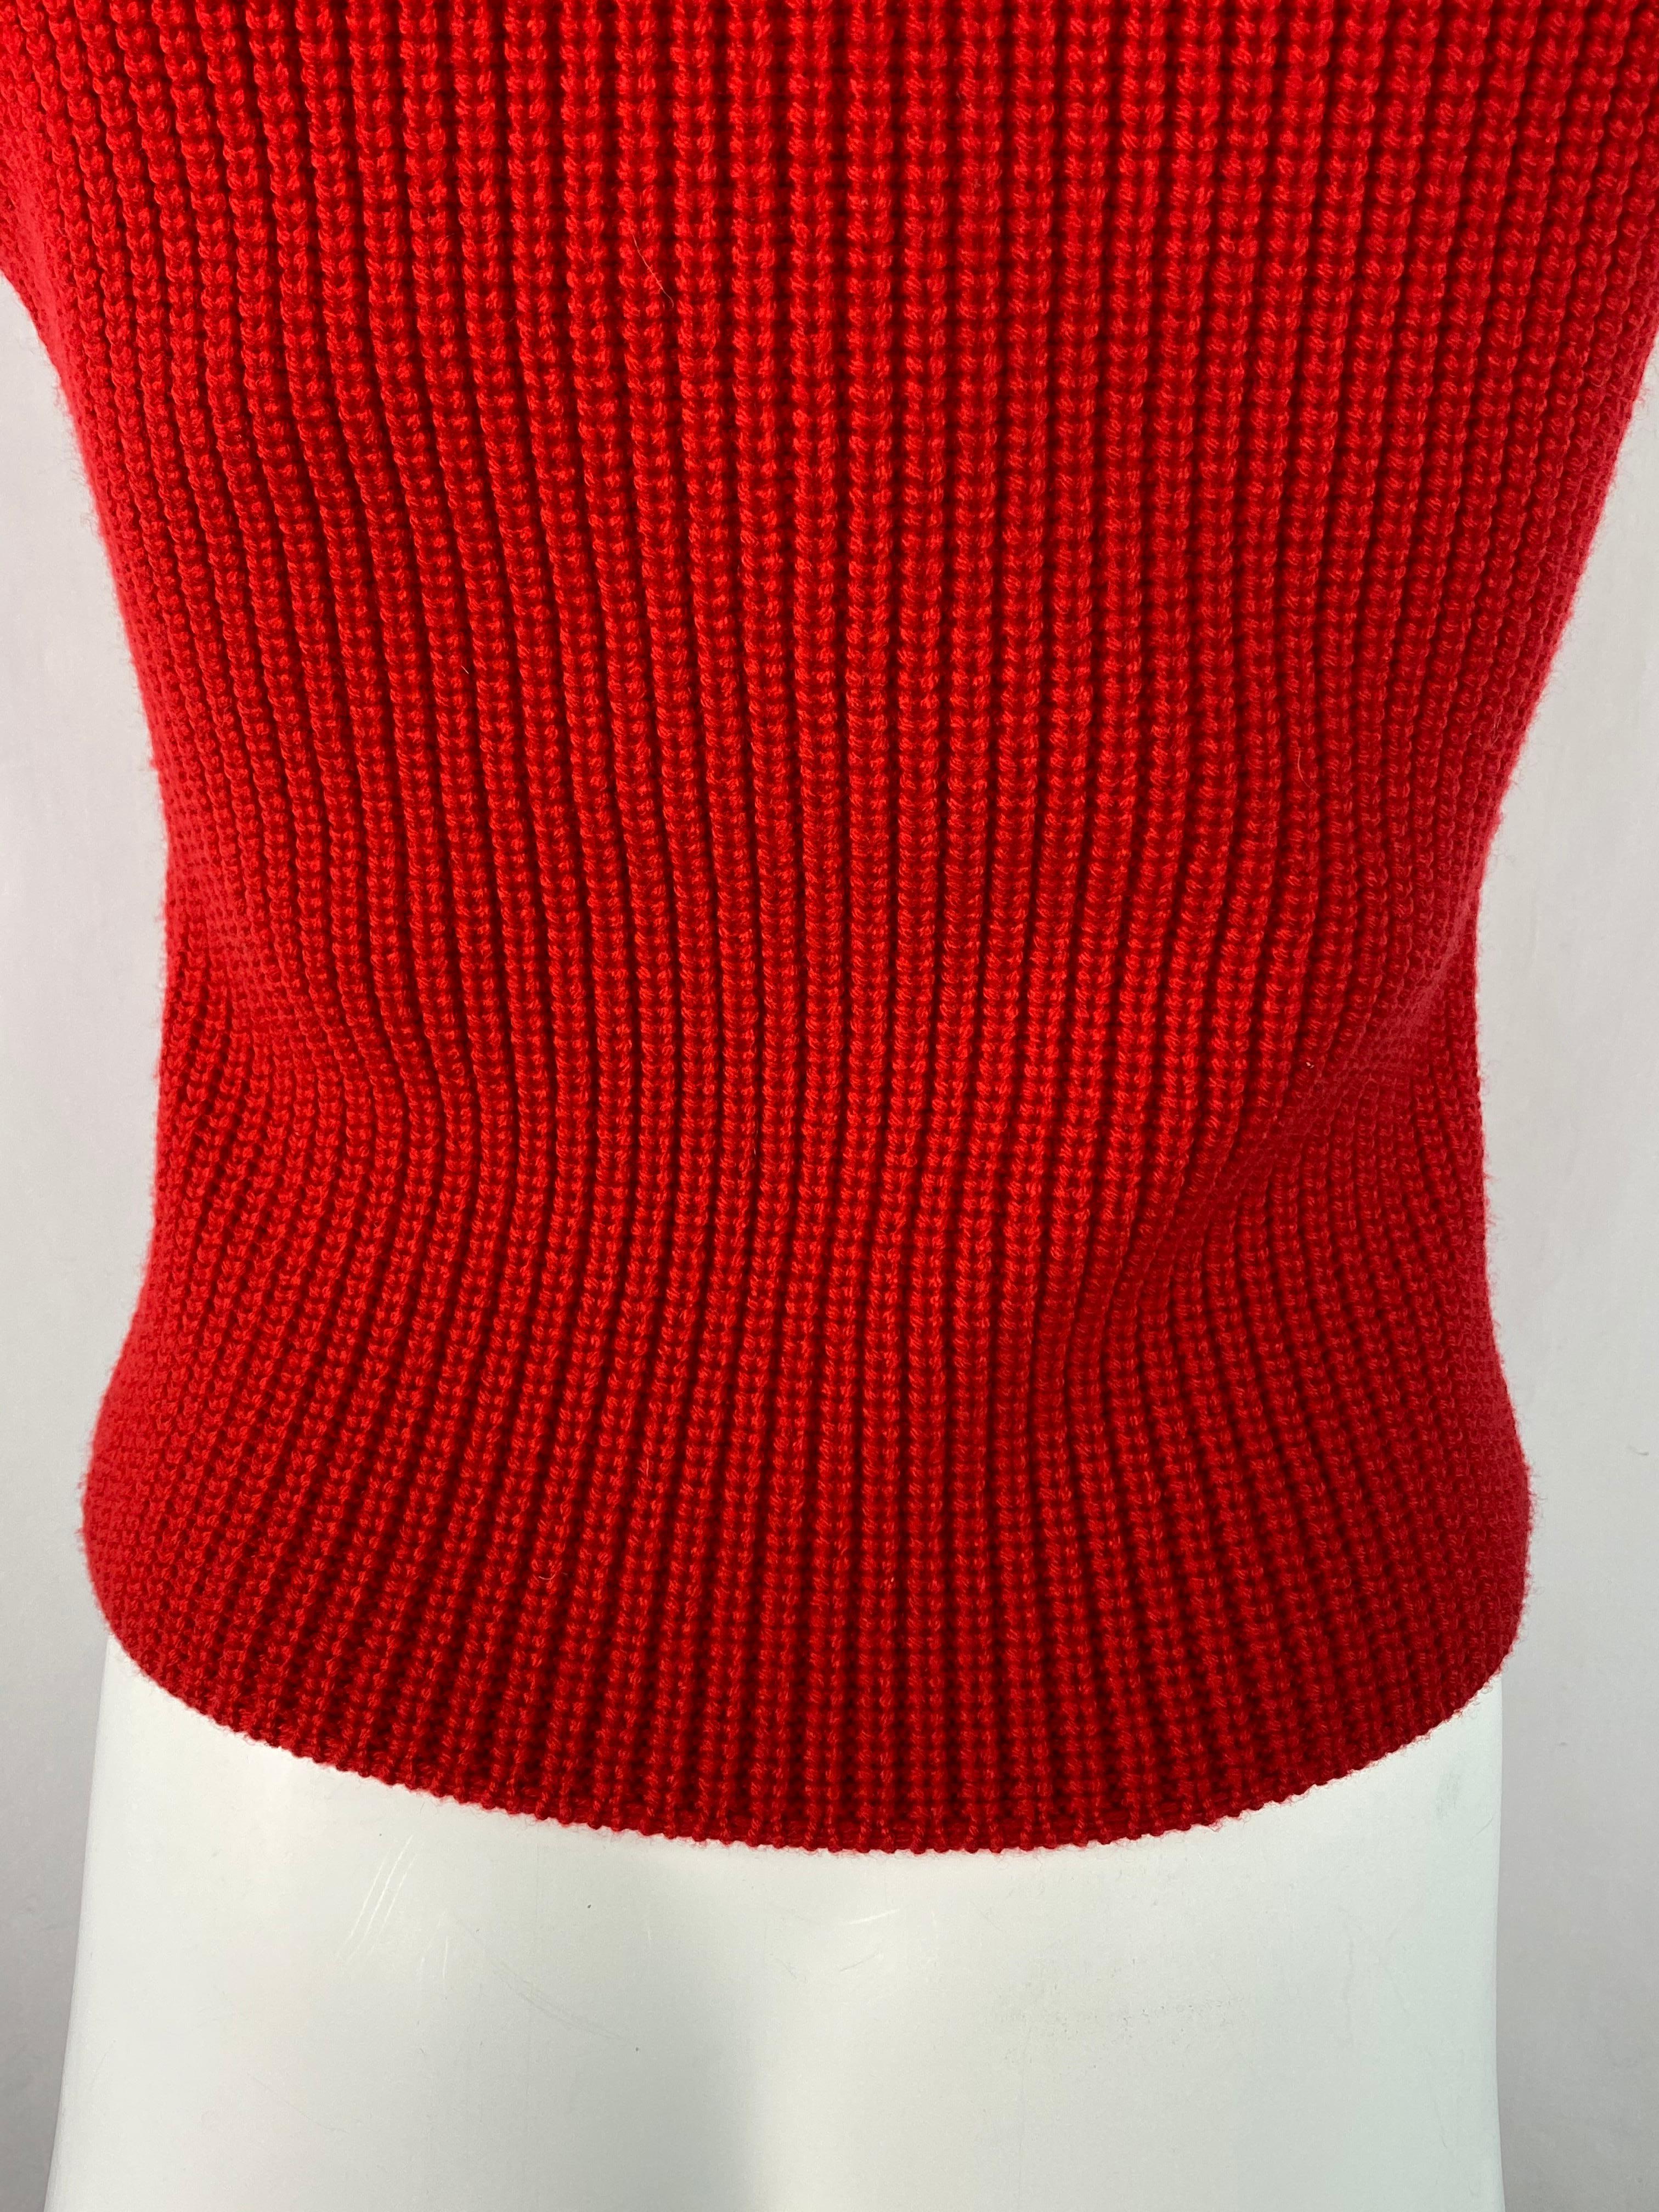 Carven Red Wool Knit Sweater Vest, Size Medium In Excellent Condition For Sale In Beverly Hills, CA